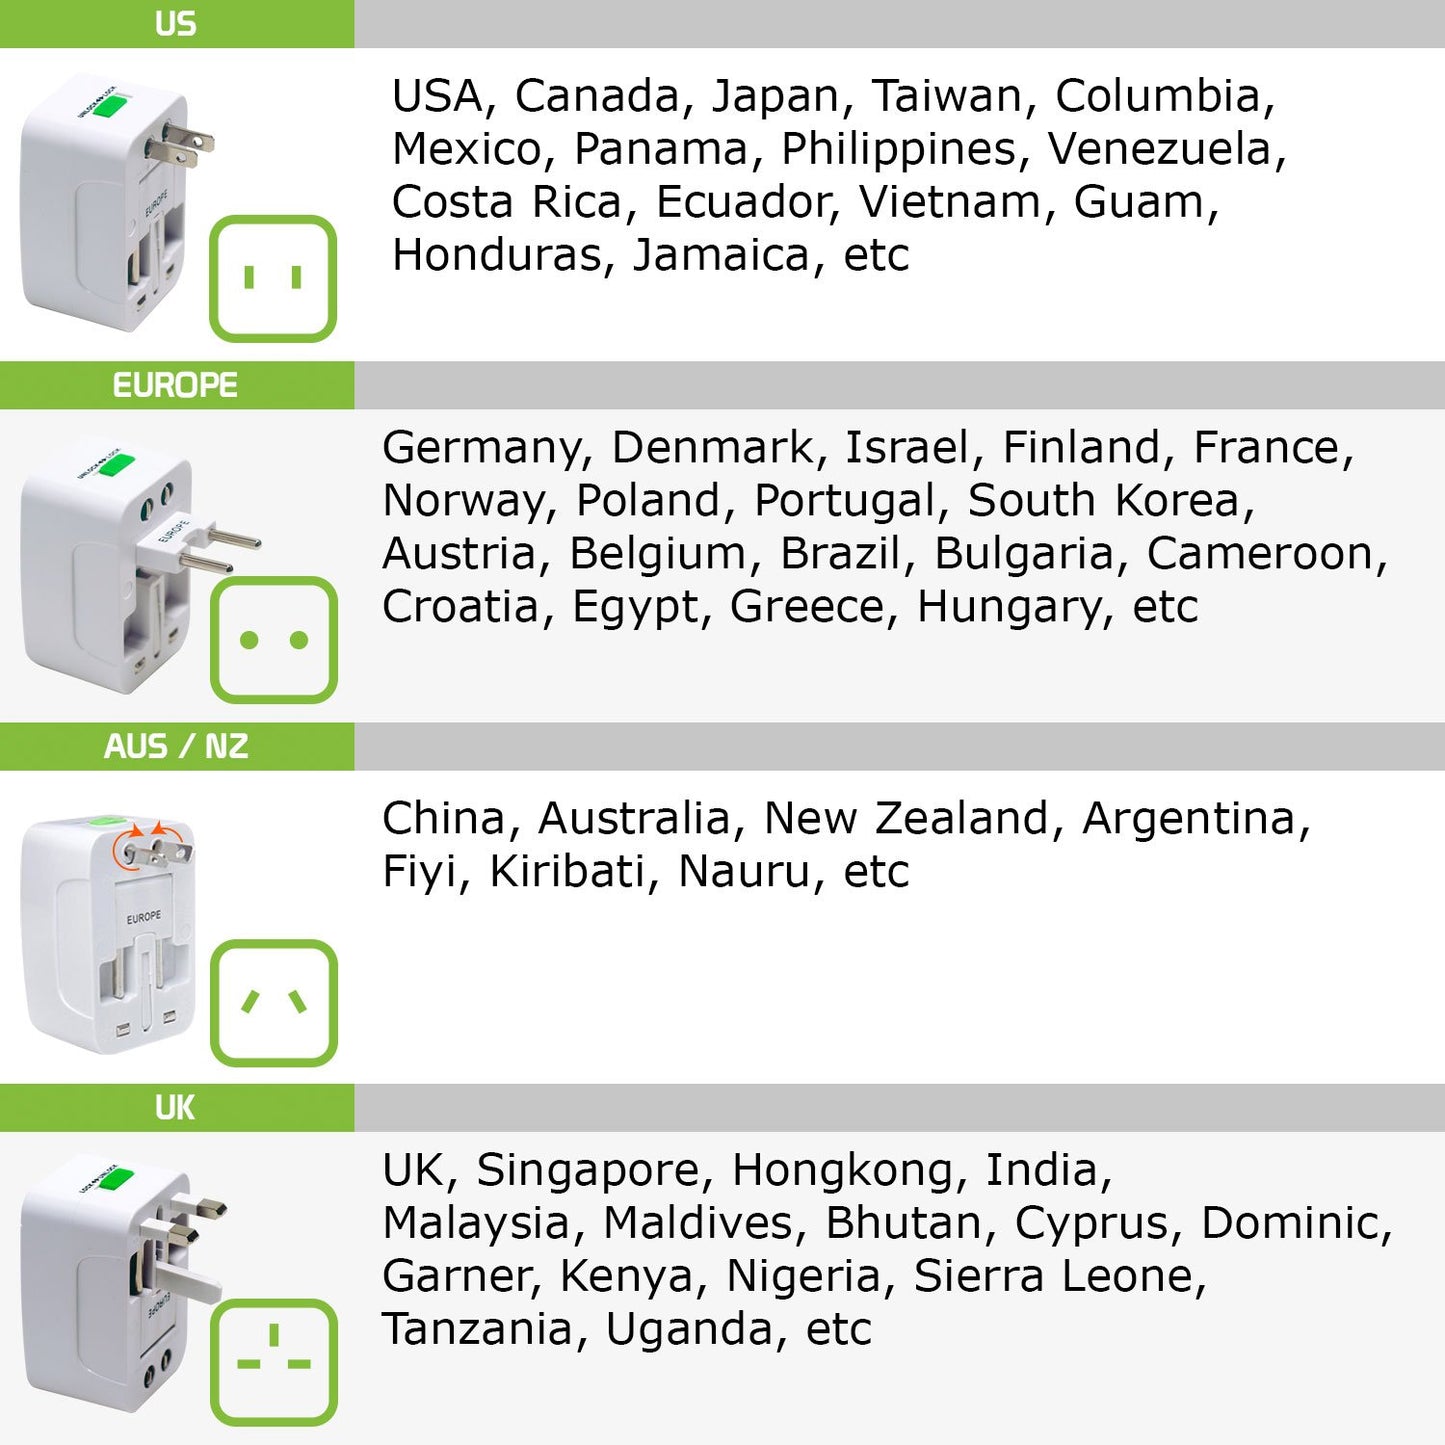 Portable Worldwide Universal Power Adapter Converter All in One International Travel Wall Plug for Wall Input in USA EU UK France Italy Australia